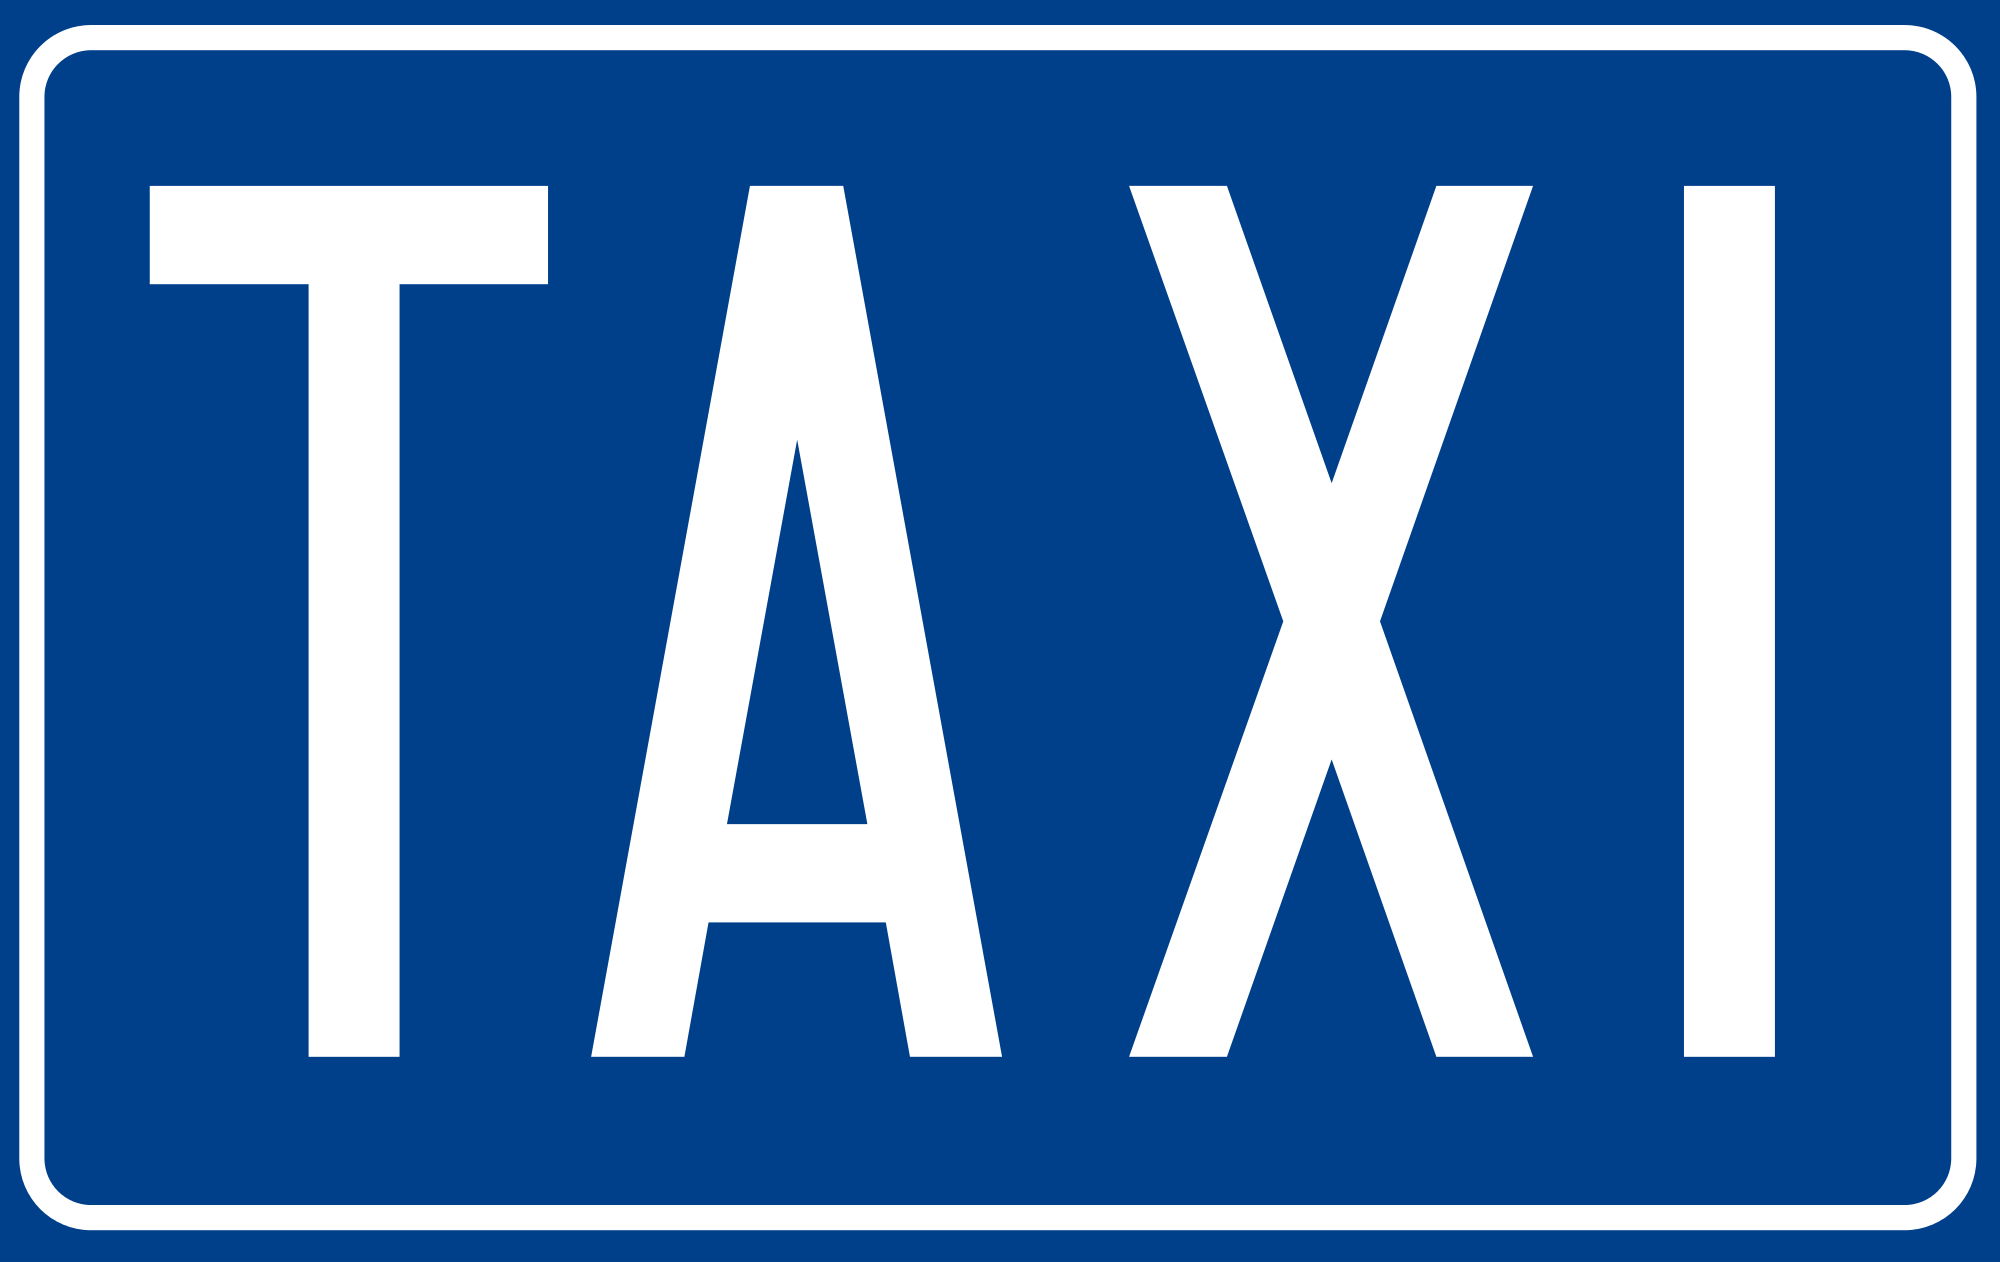 File:Italian traffic signs - old - taxi.svg - Wikimedia Commons